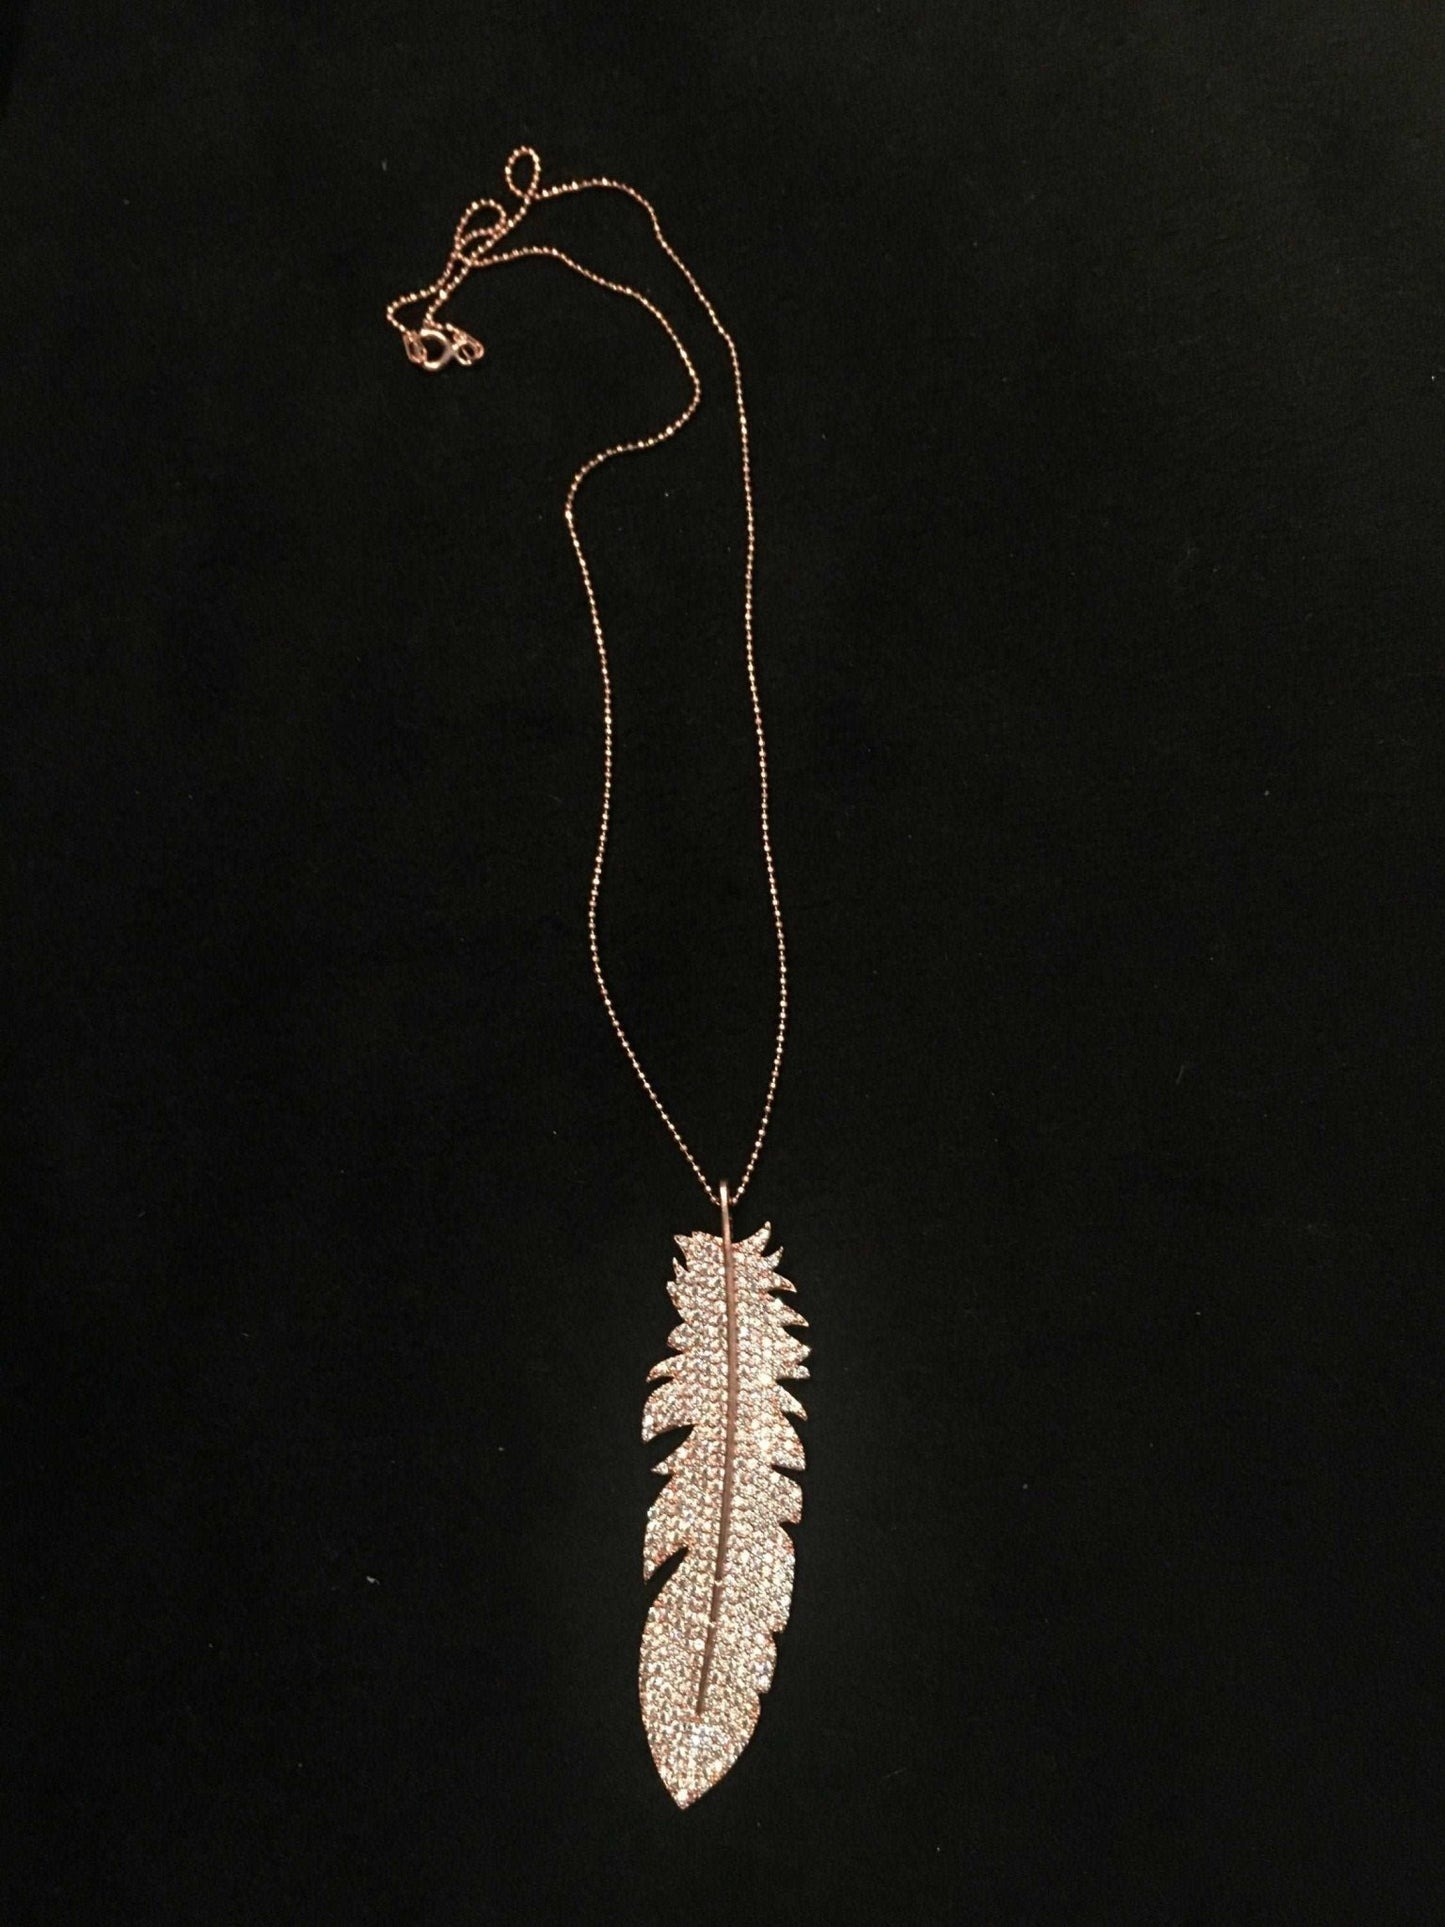 Feather Silver Necklace Custom Desing White Zircon Gemstone Rose Gold Handmade, 925 Sterling Silver Feather Jewerly Pendant - Tracesilver